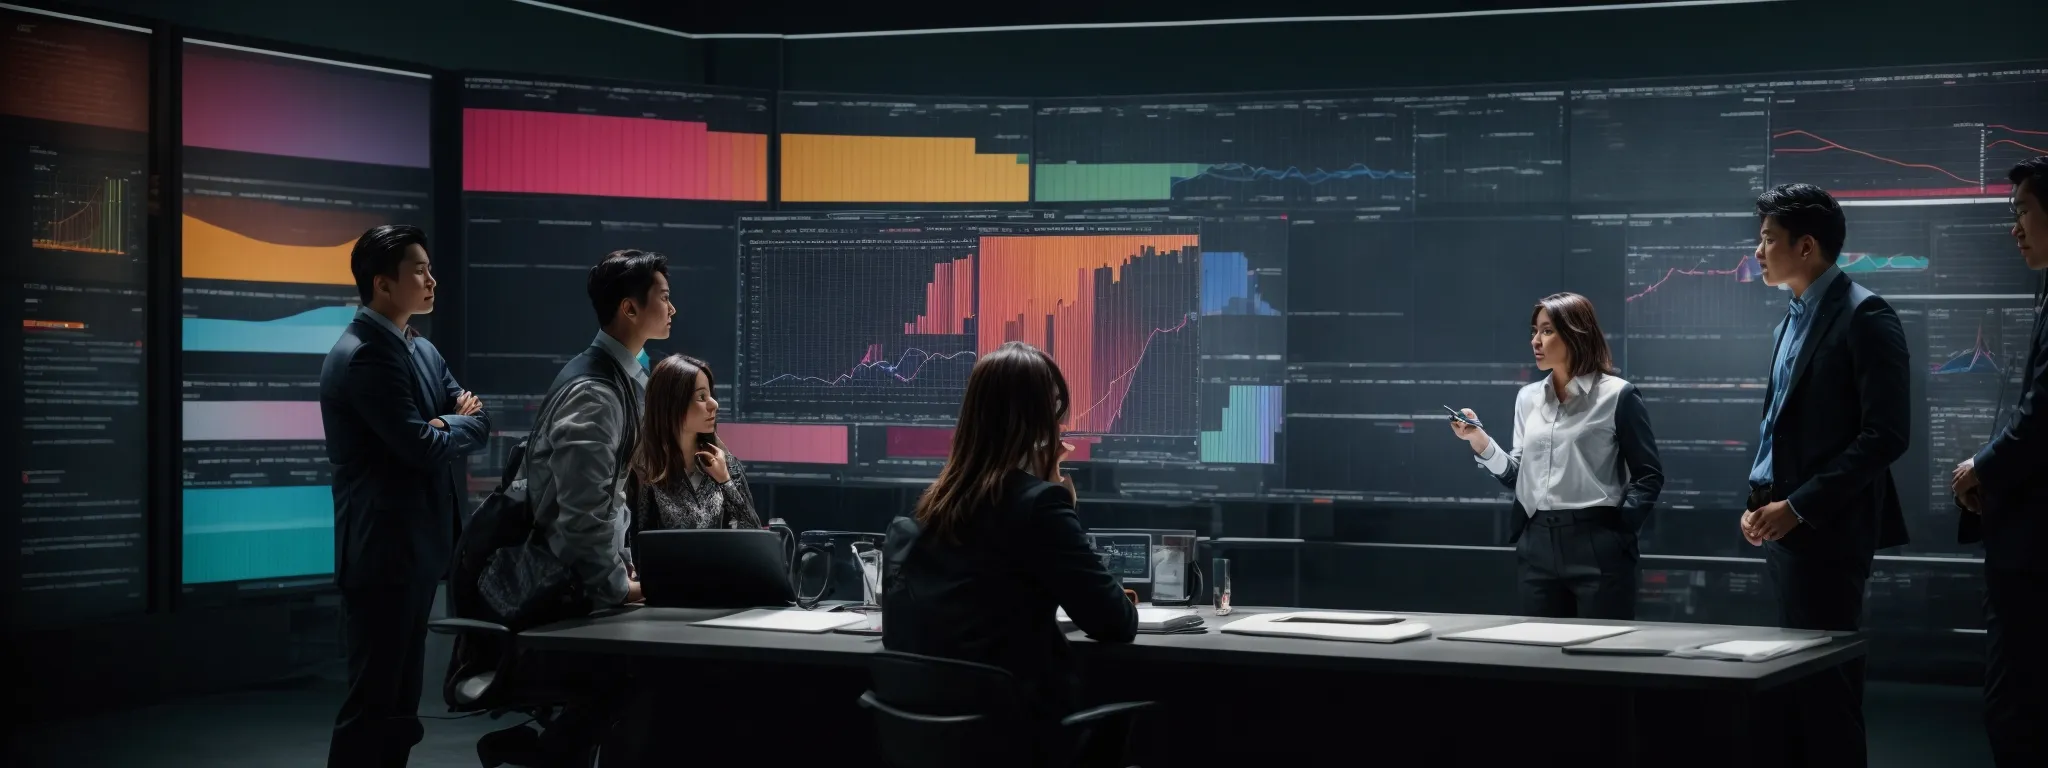 a group of professionals gathered around a large screen displaying colorful graphs and project timelines.